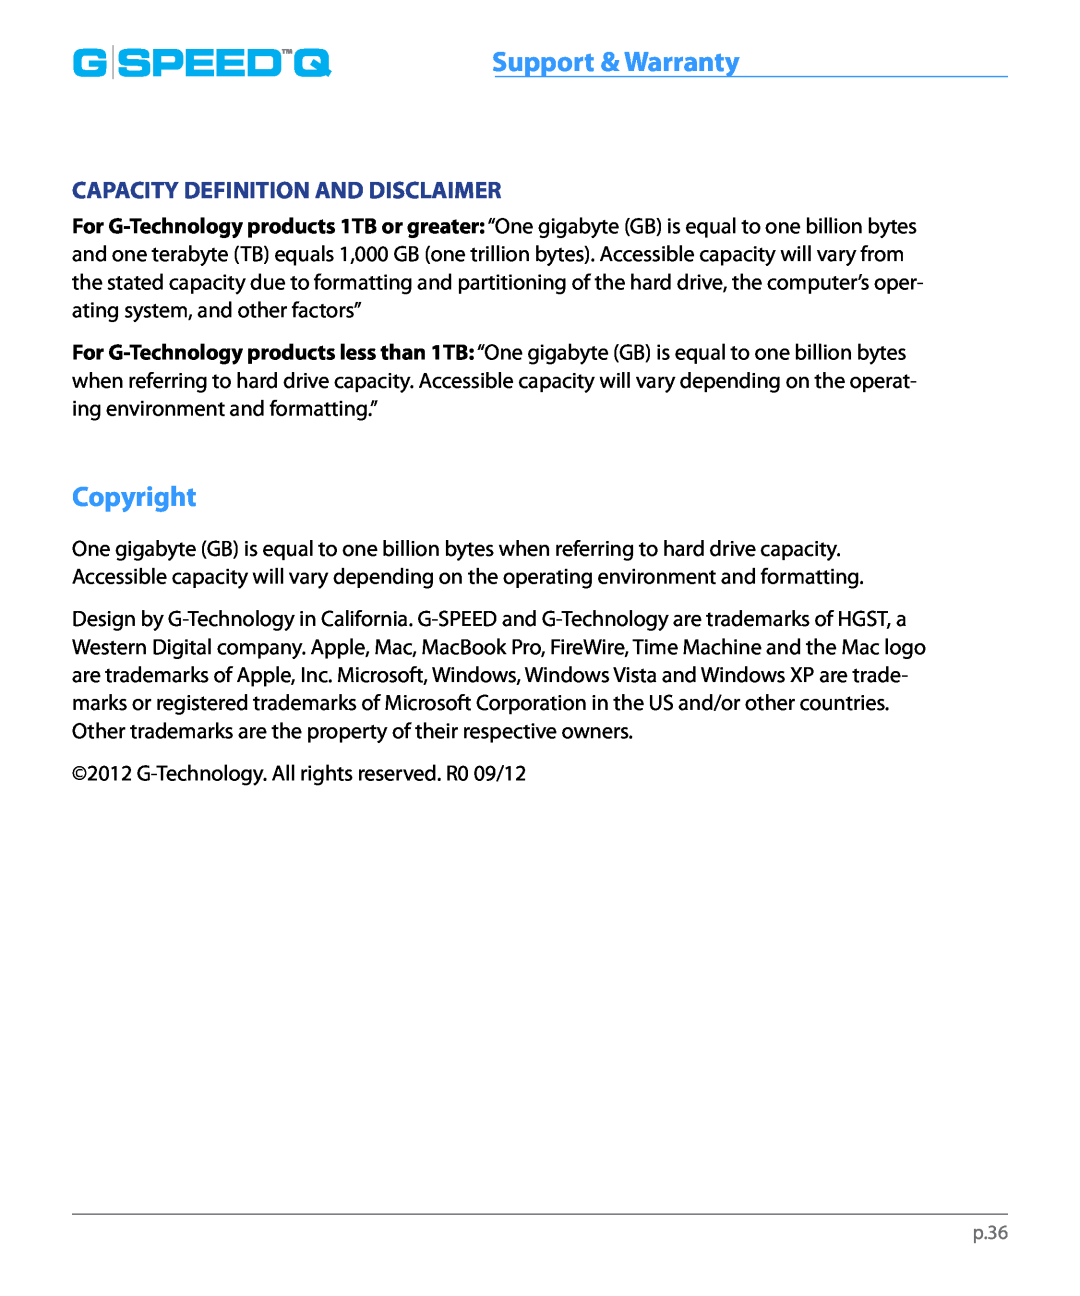 G-Technology 0G02319 manual Copyright, Capacity Definition And Disclaimer, G Speedq, Support & Warranty 